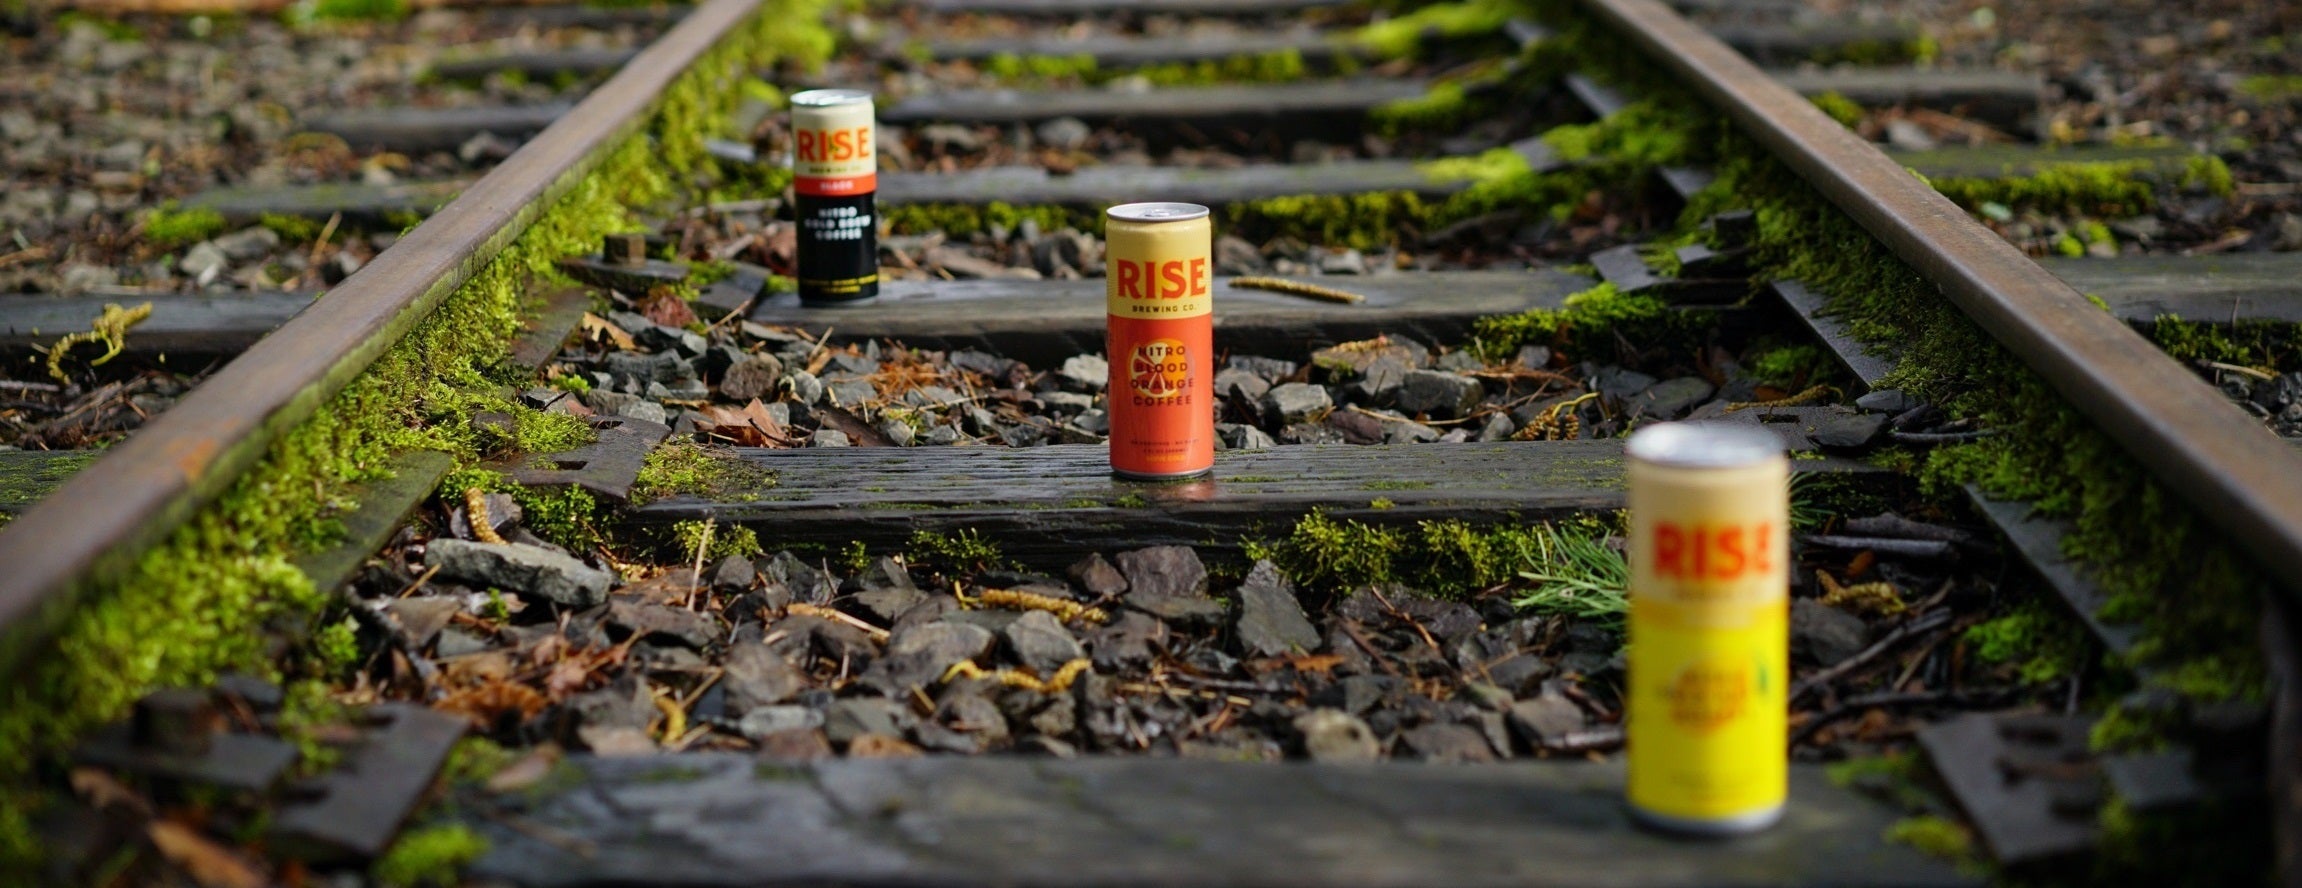 Cans of RISE Coffee on train tracks - Original Black, Blood Orange, and Lemonade flavors of nitro cold brew coffee